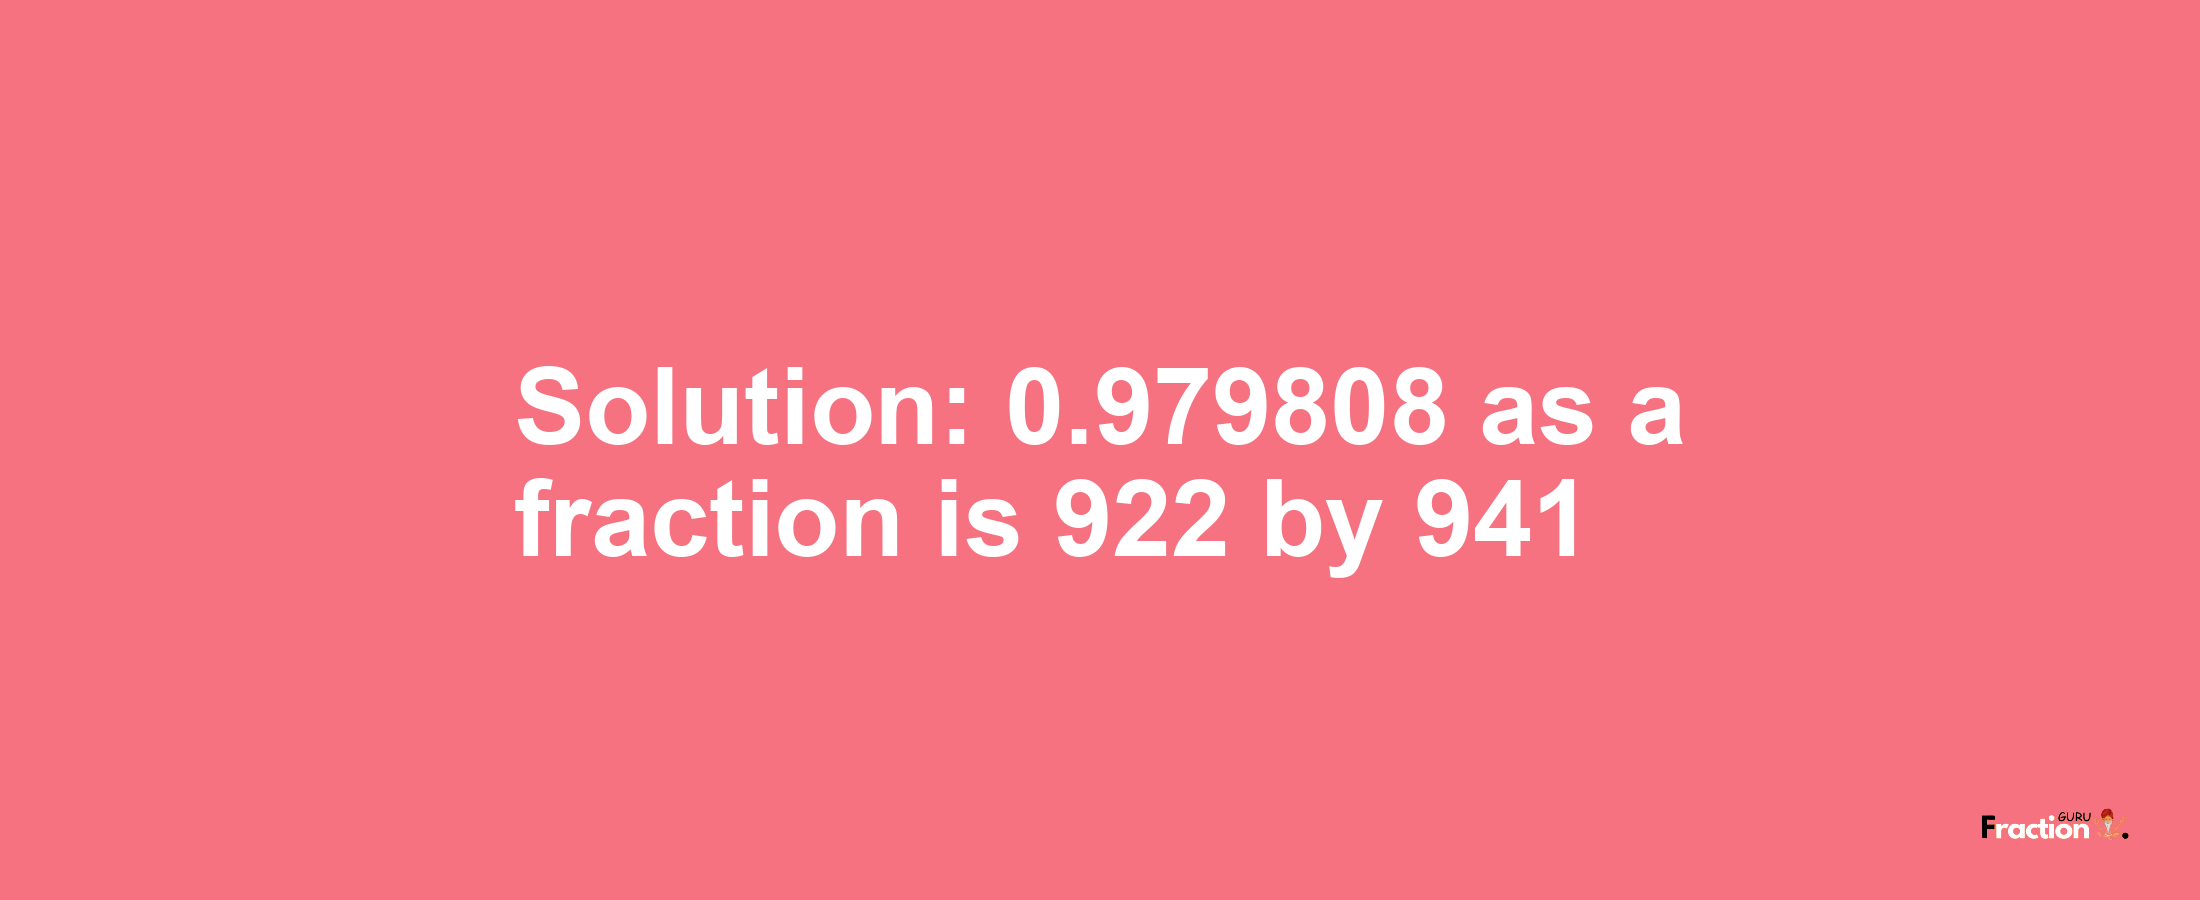 Solution:0.979808 as a fraction is 922/941